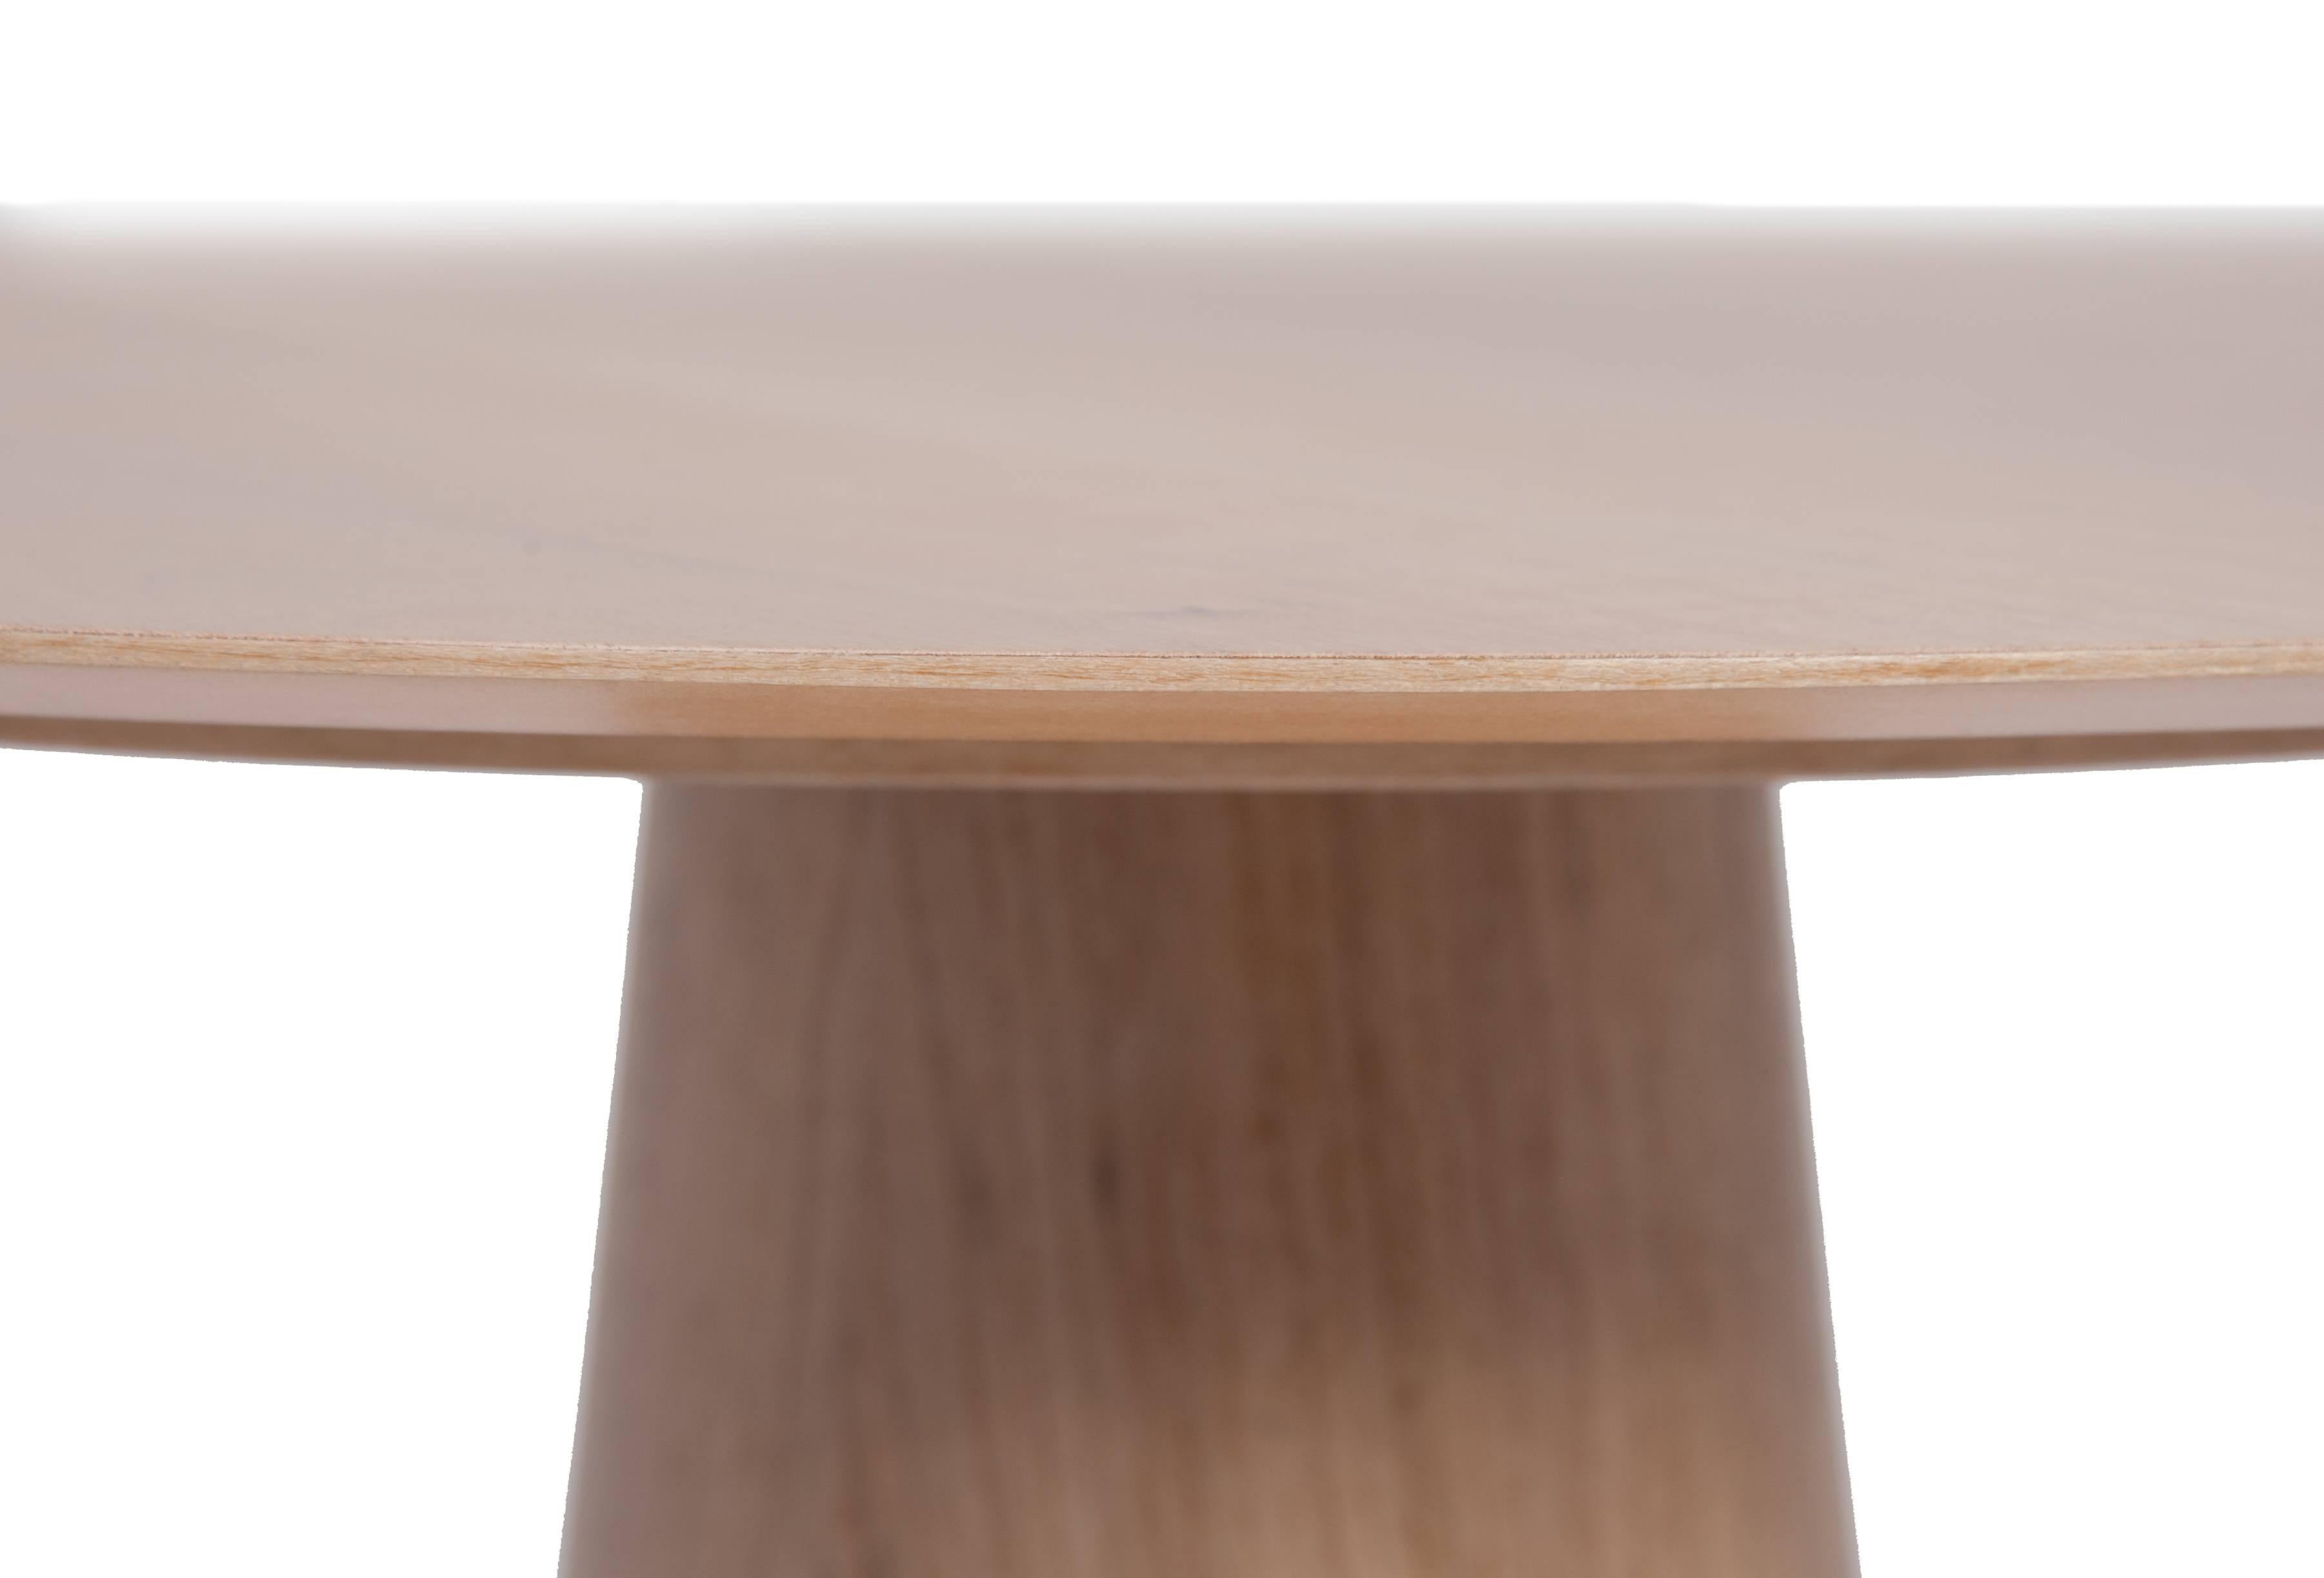 The dialogue between two materials and two different constructive methods happens to define the monolithic geometry of this table base that sometimes reveals transparency and brightness, sometimes opacity and the richness of the wooden surface.